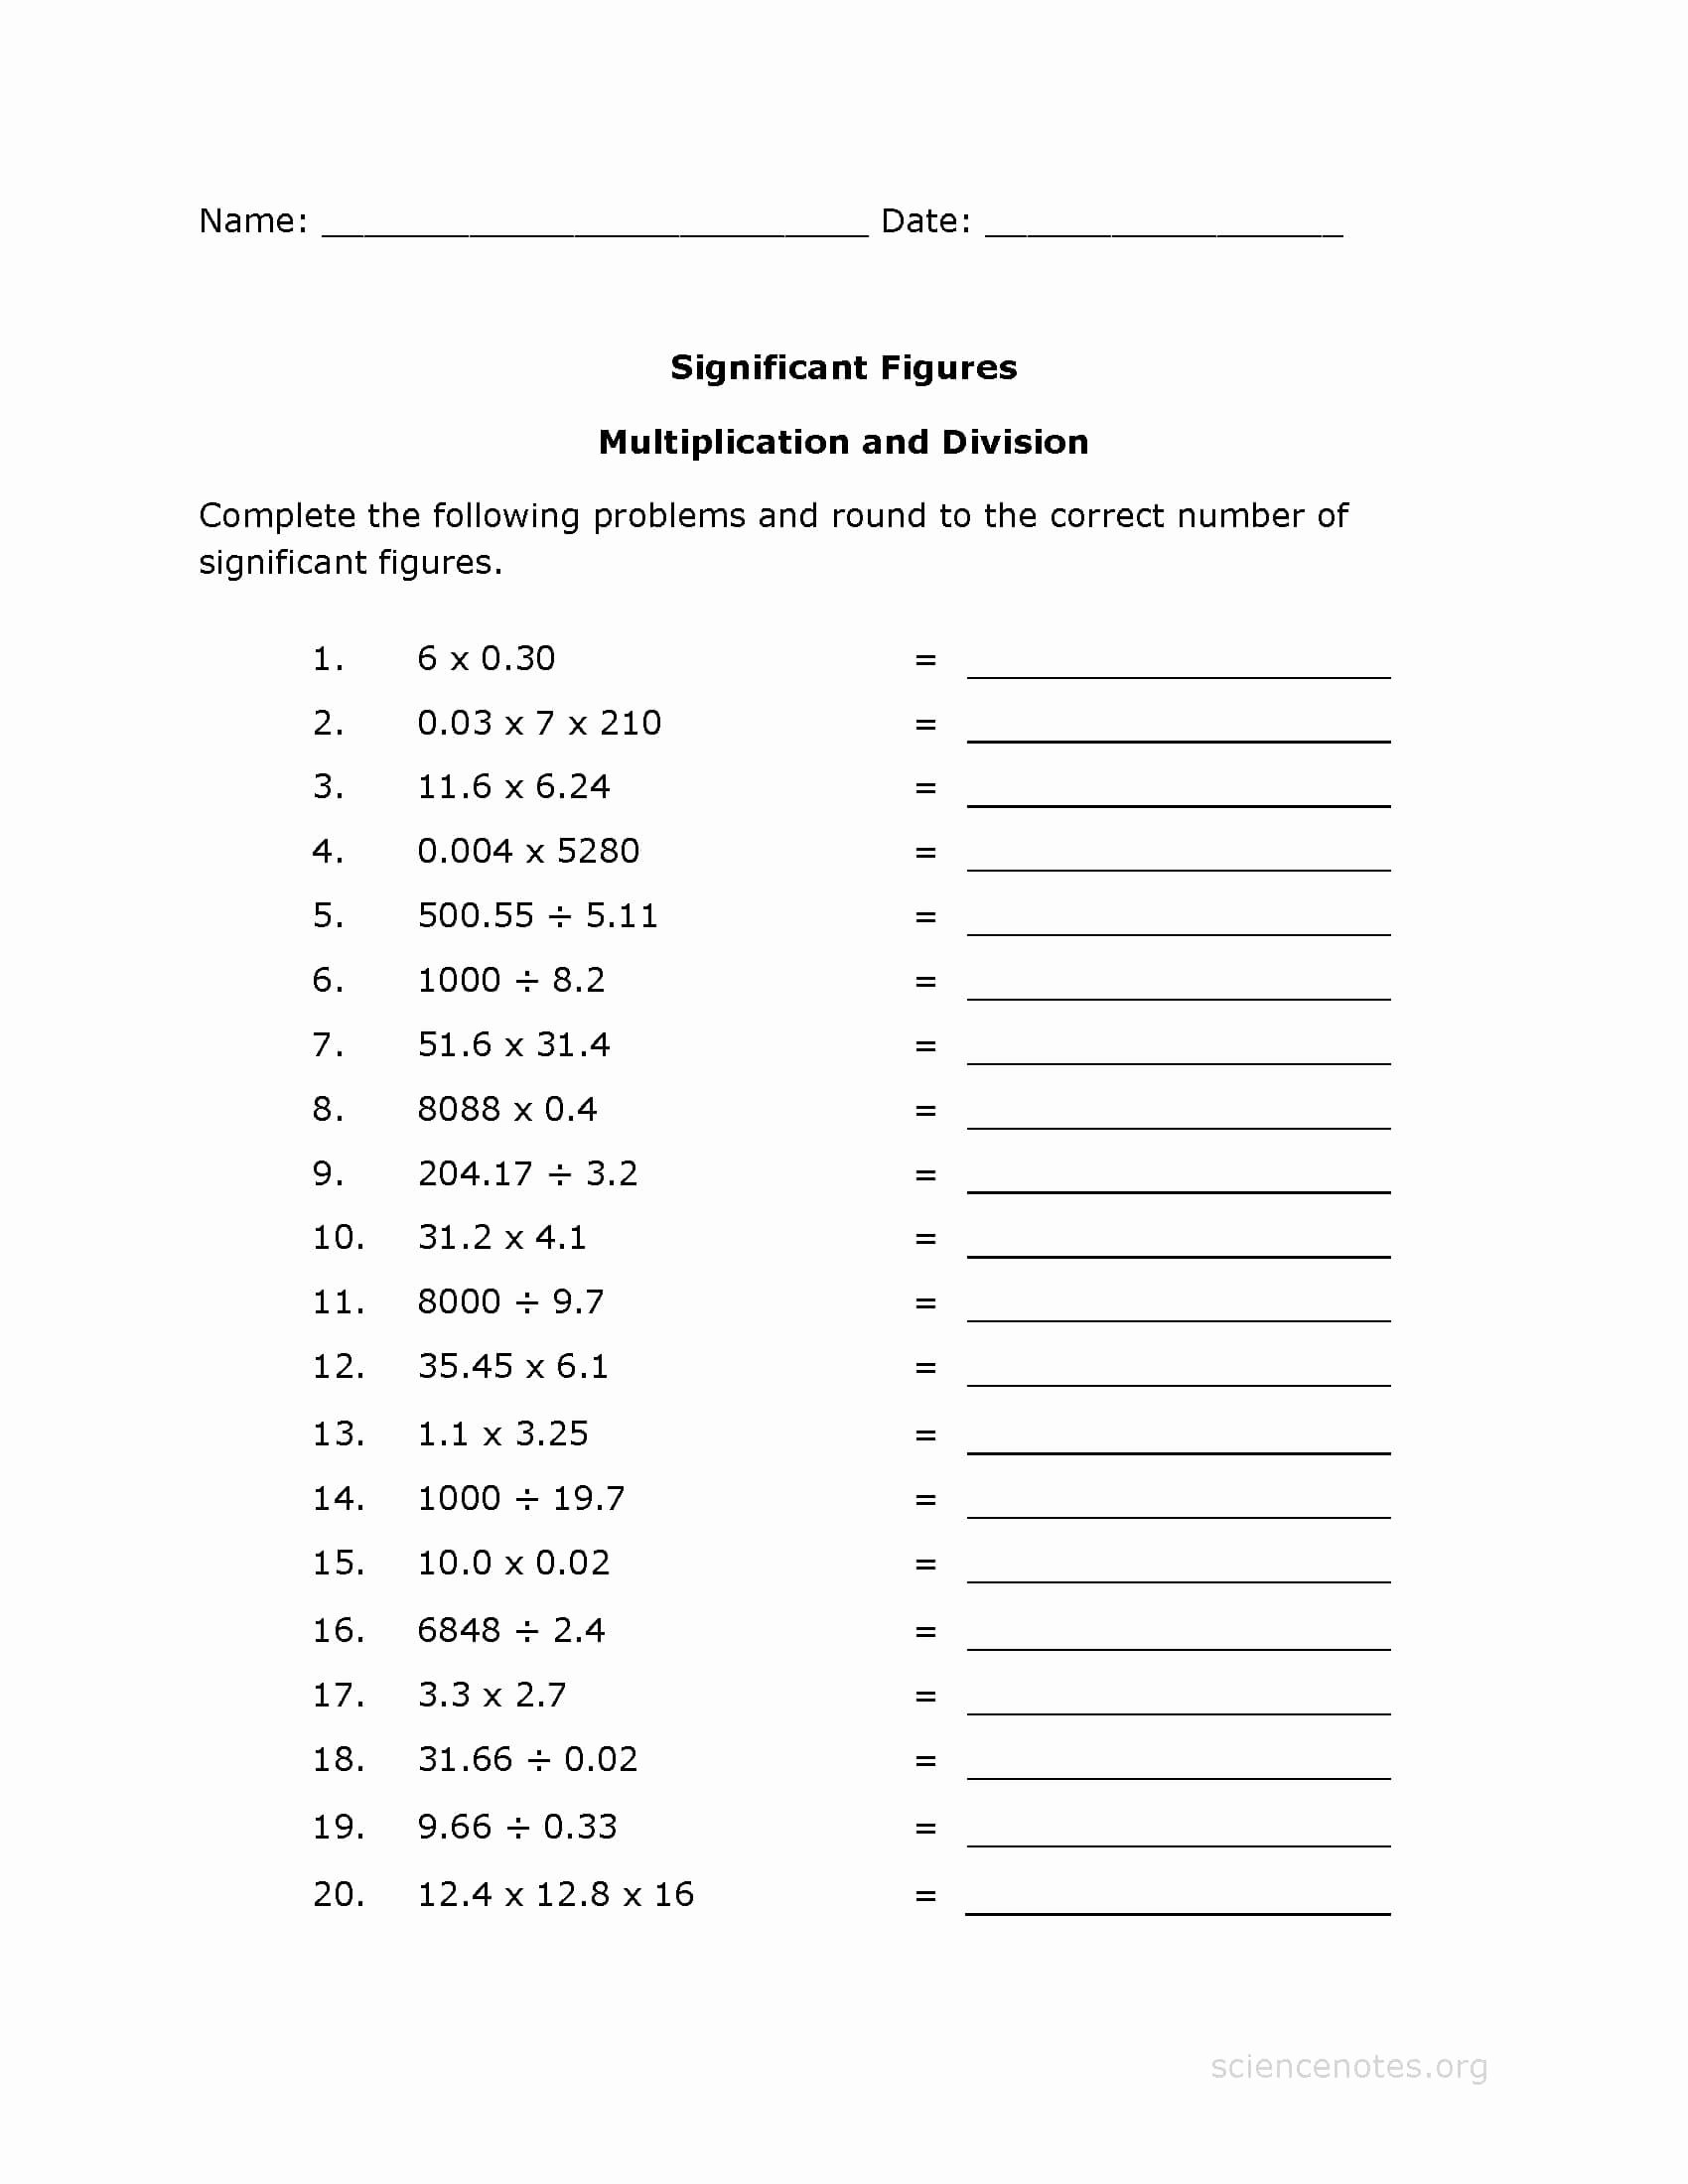 Significant Figures Worksheet with Answers Luxury Significant Figures Multiplication Worksheet